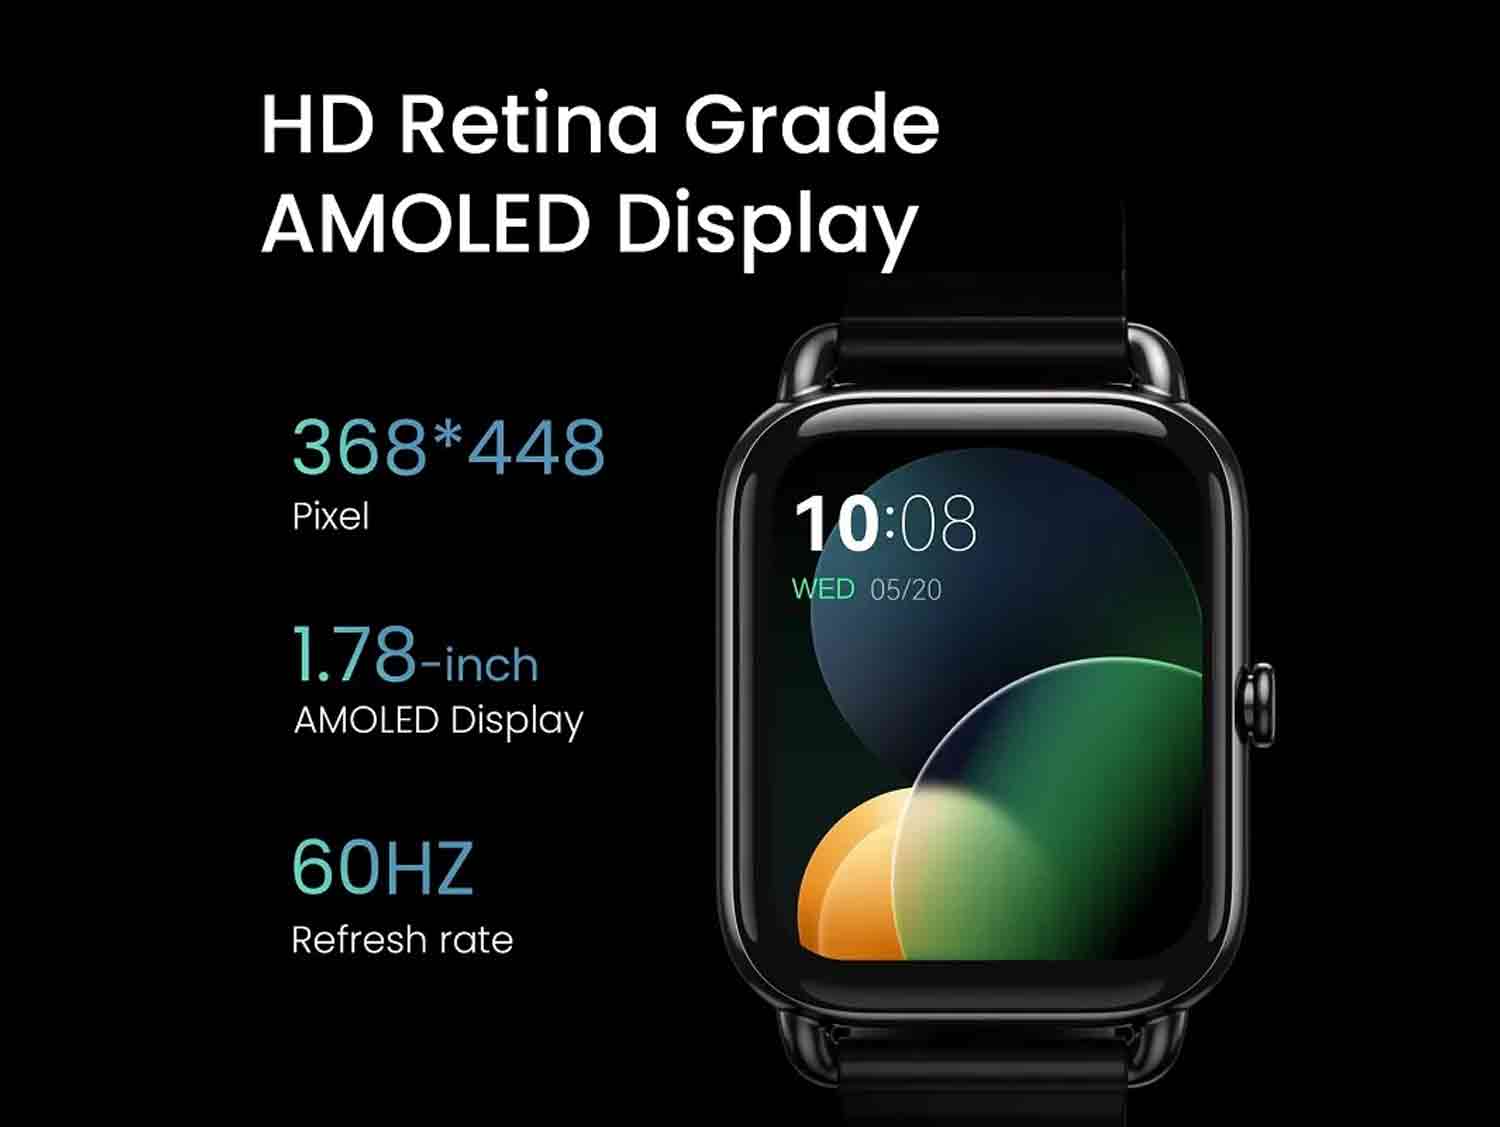 Haylou RS4 Plus Smart Watch with AMOLED Screen